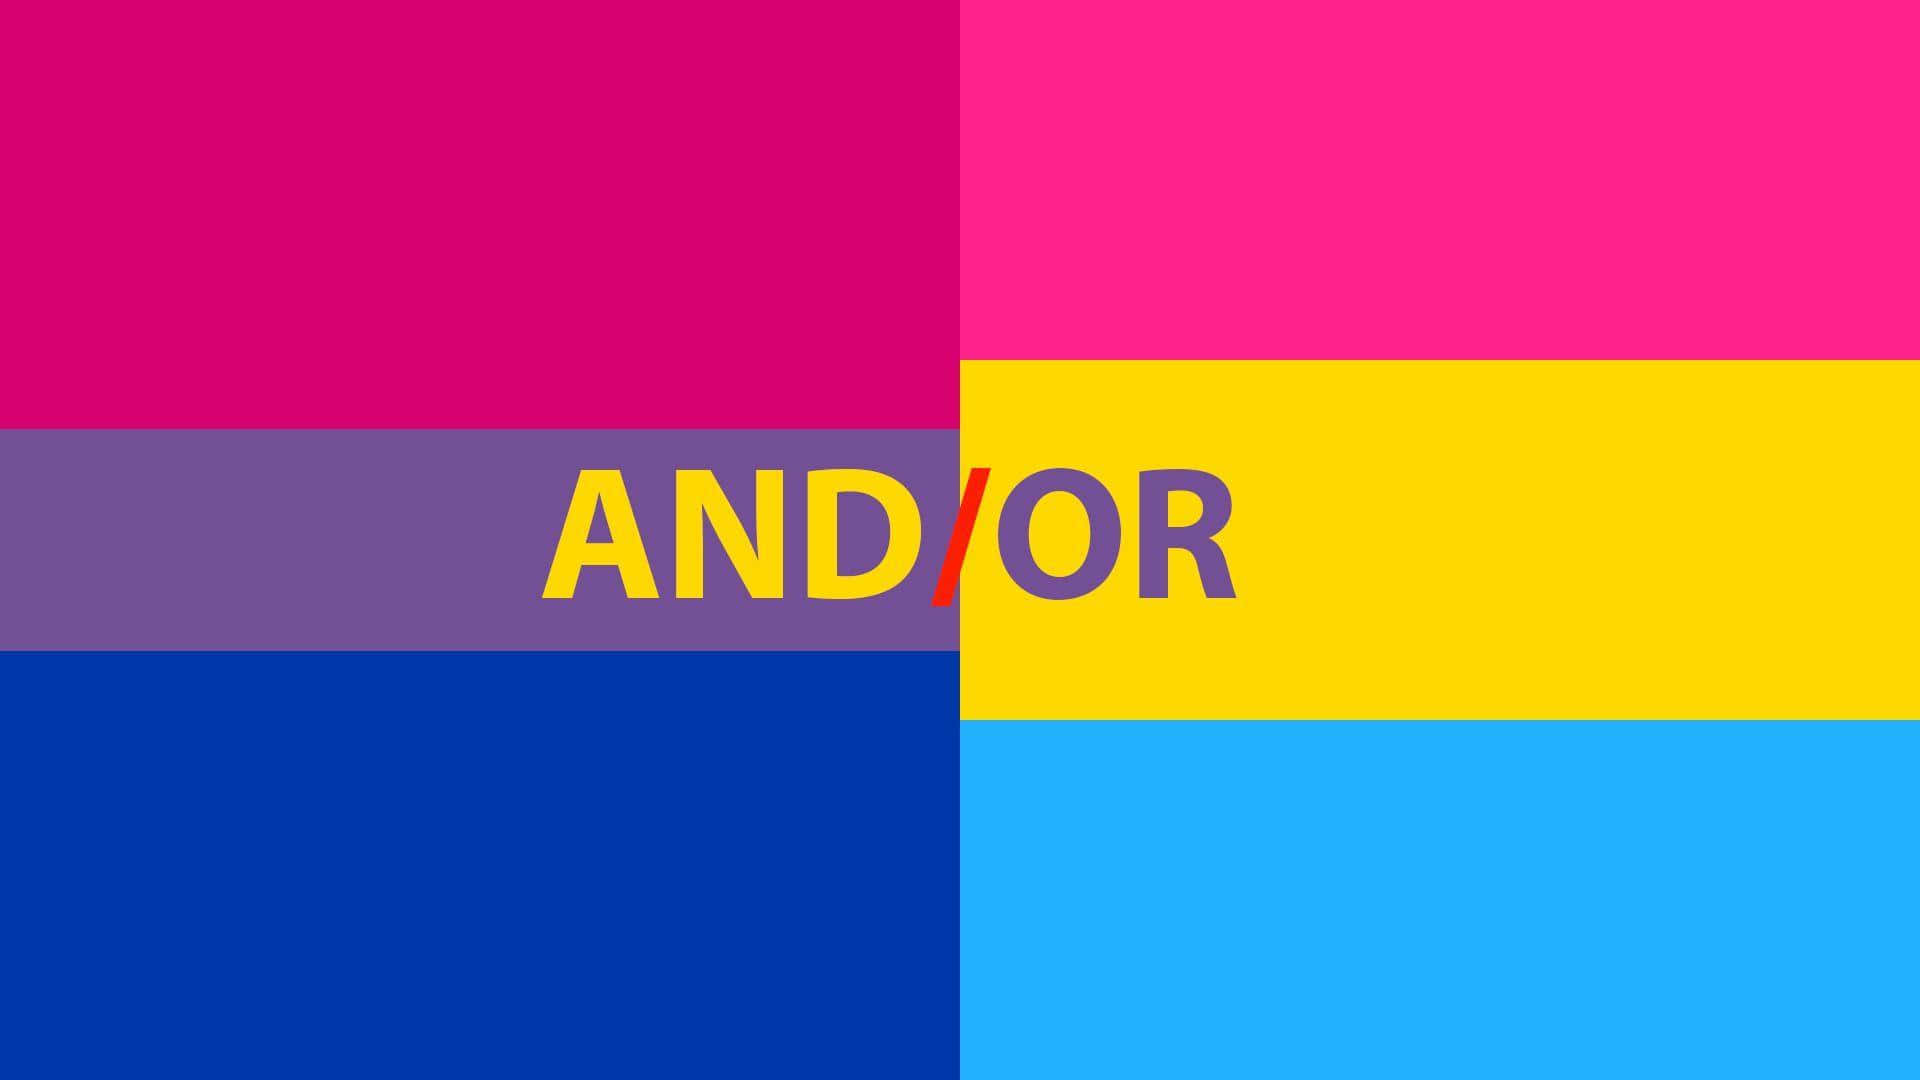 Andor - A Rainbow Colored Flag With The Word Andor